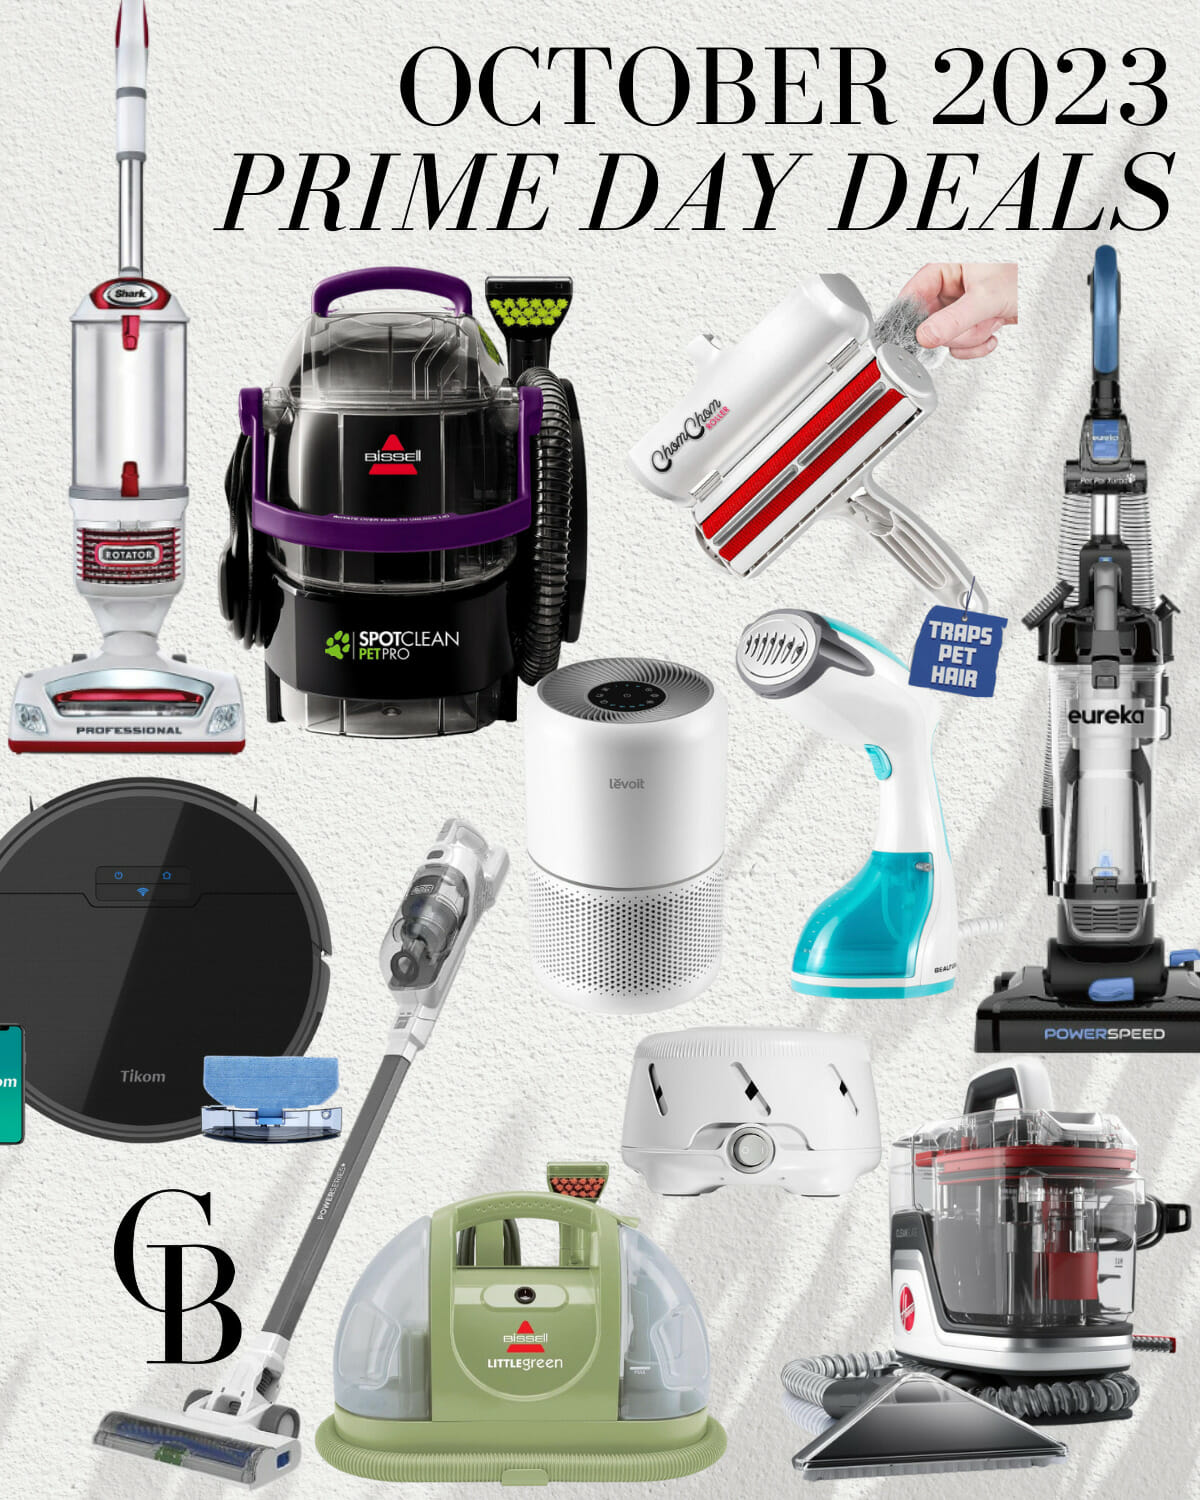 October Prime Day 2023 Exclusives | #October #PrimeDay #Exclusives #2023 #Home #homedecor #cleaning #organization #storage #vacuum #cleaner #noisemachine #pets #steamer #travel